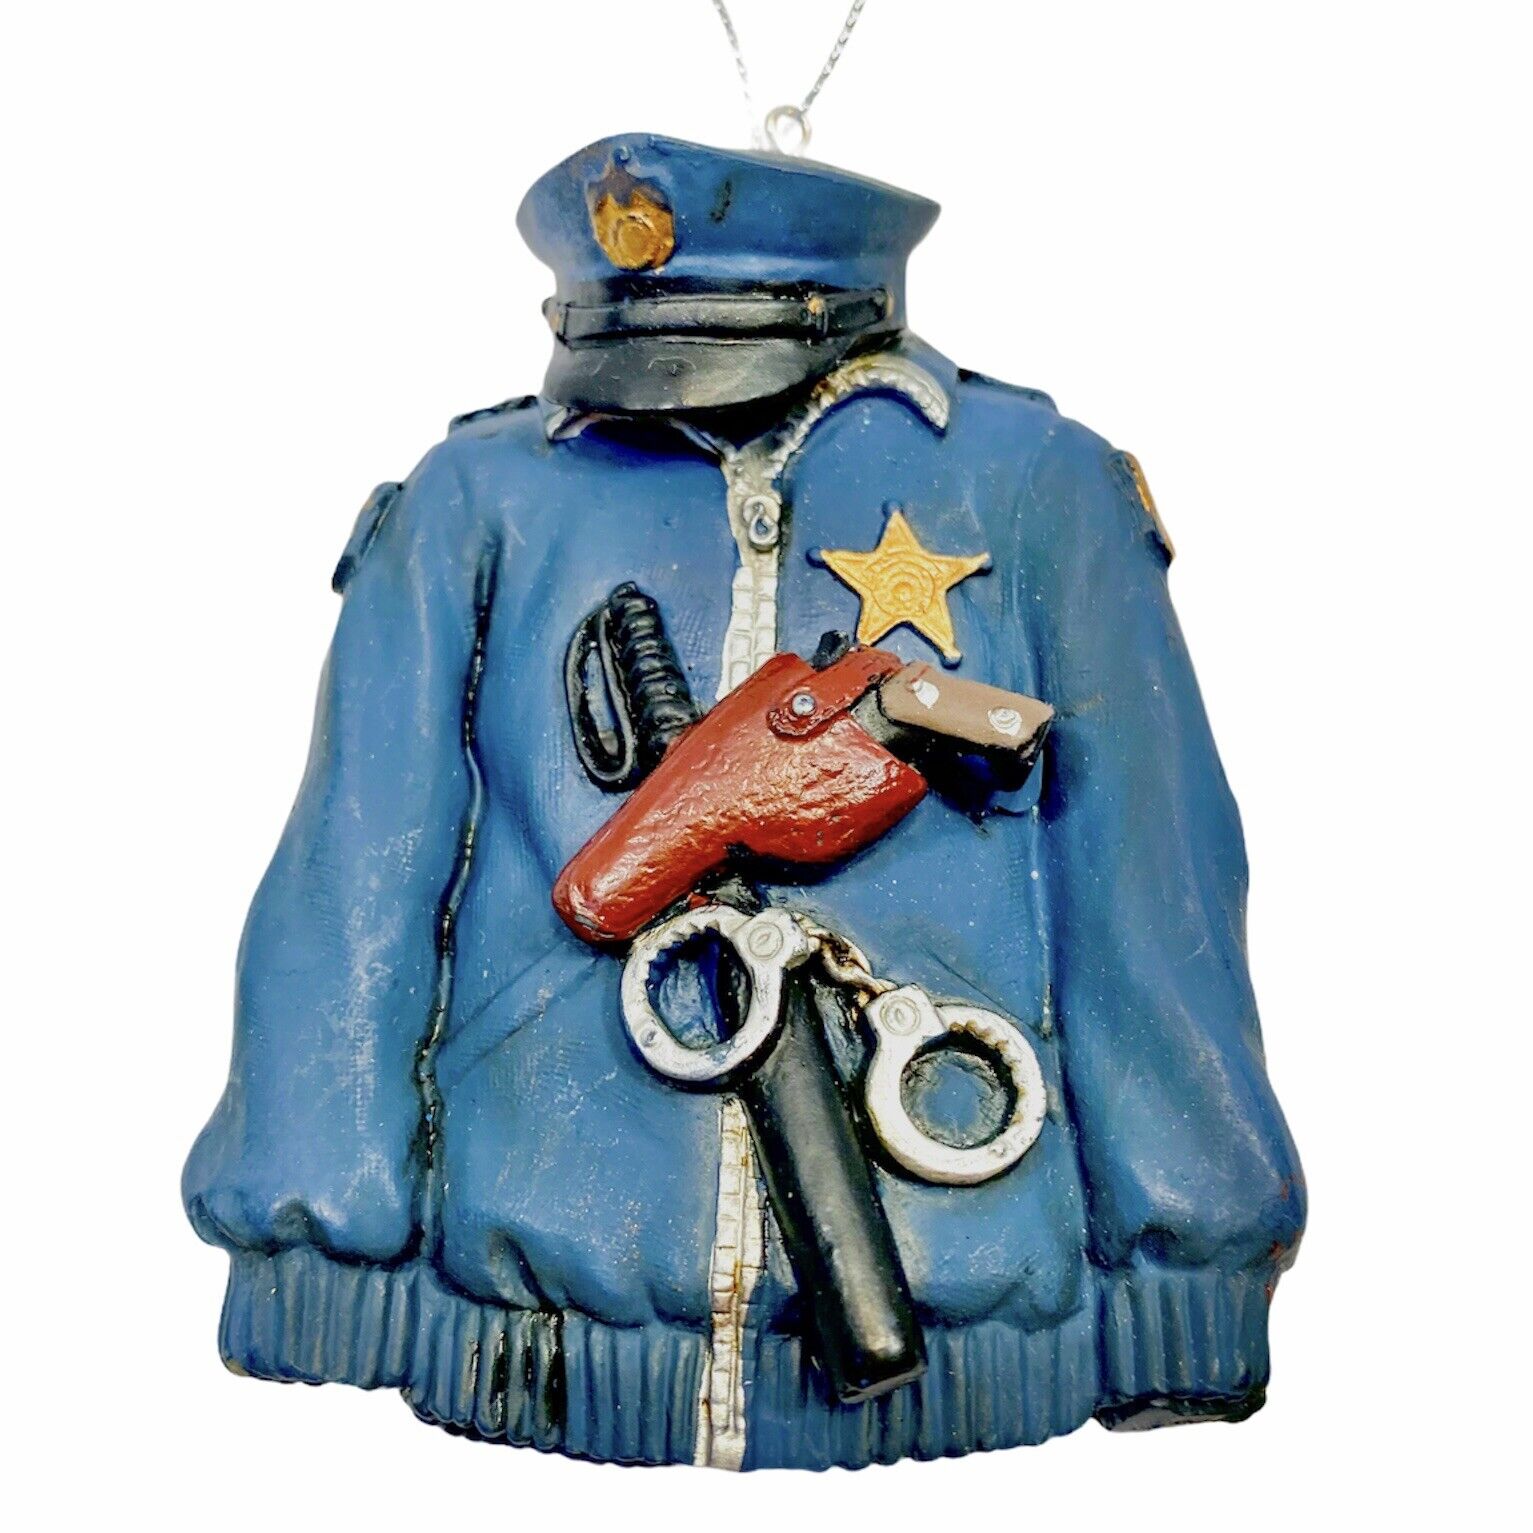 Police Jacket Ornament Blue Resin Accents Badge Hat Baton Gun And Handcuffs